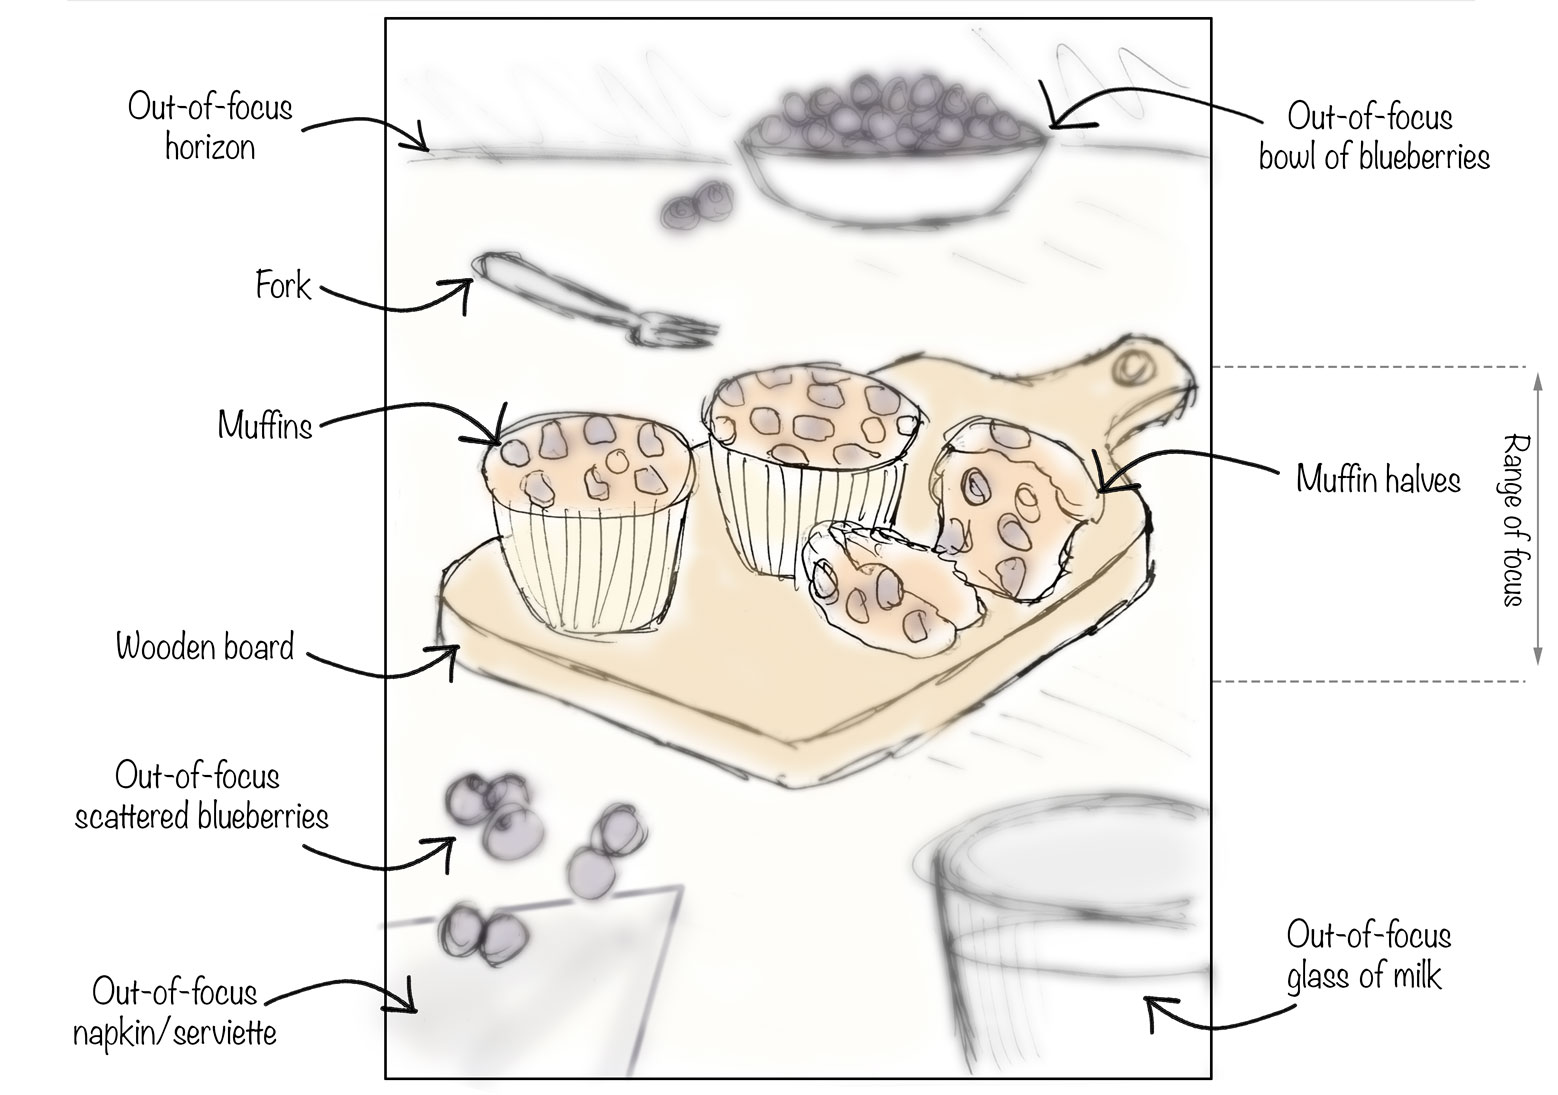 Sketch of muffins for photography brief